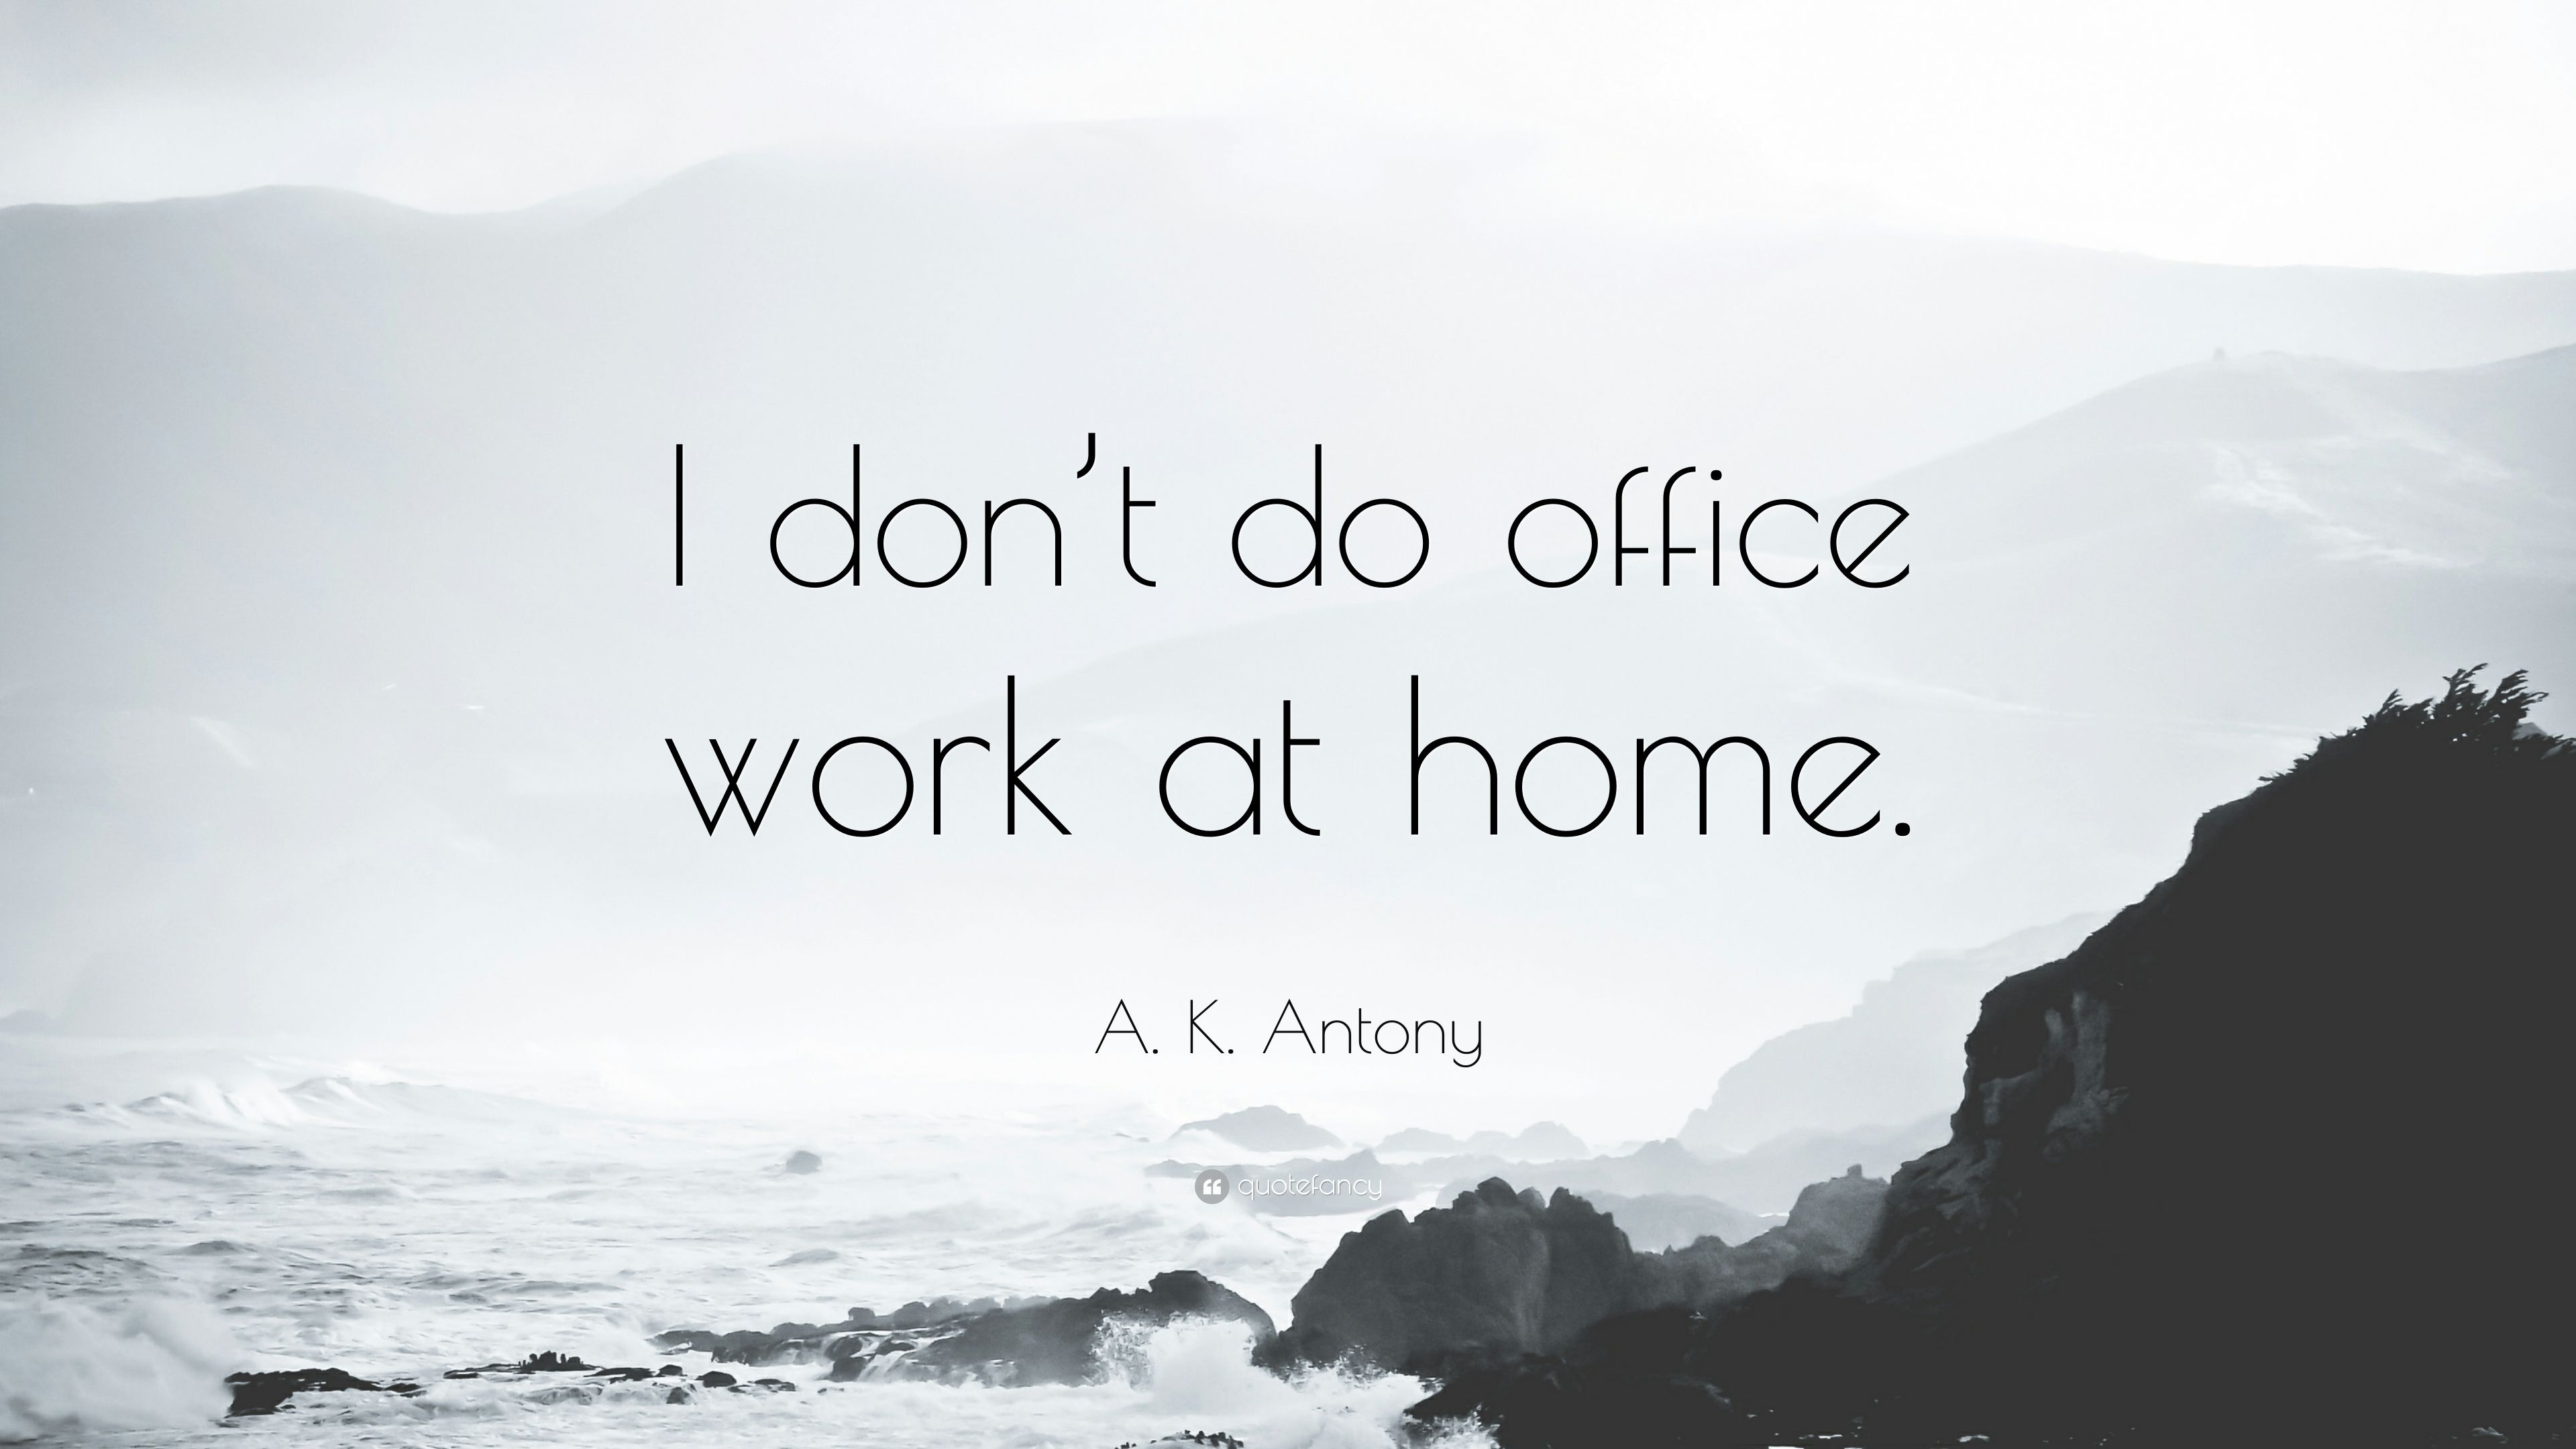 A. K. Antony Quote: “I don't do office work at home.” (10 wallpaper)